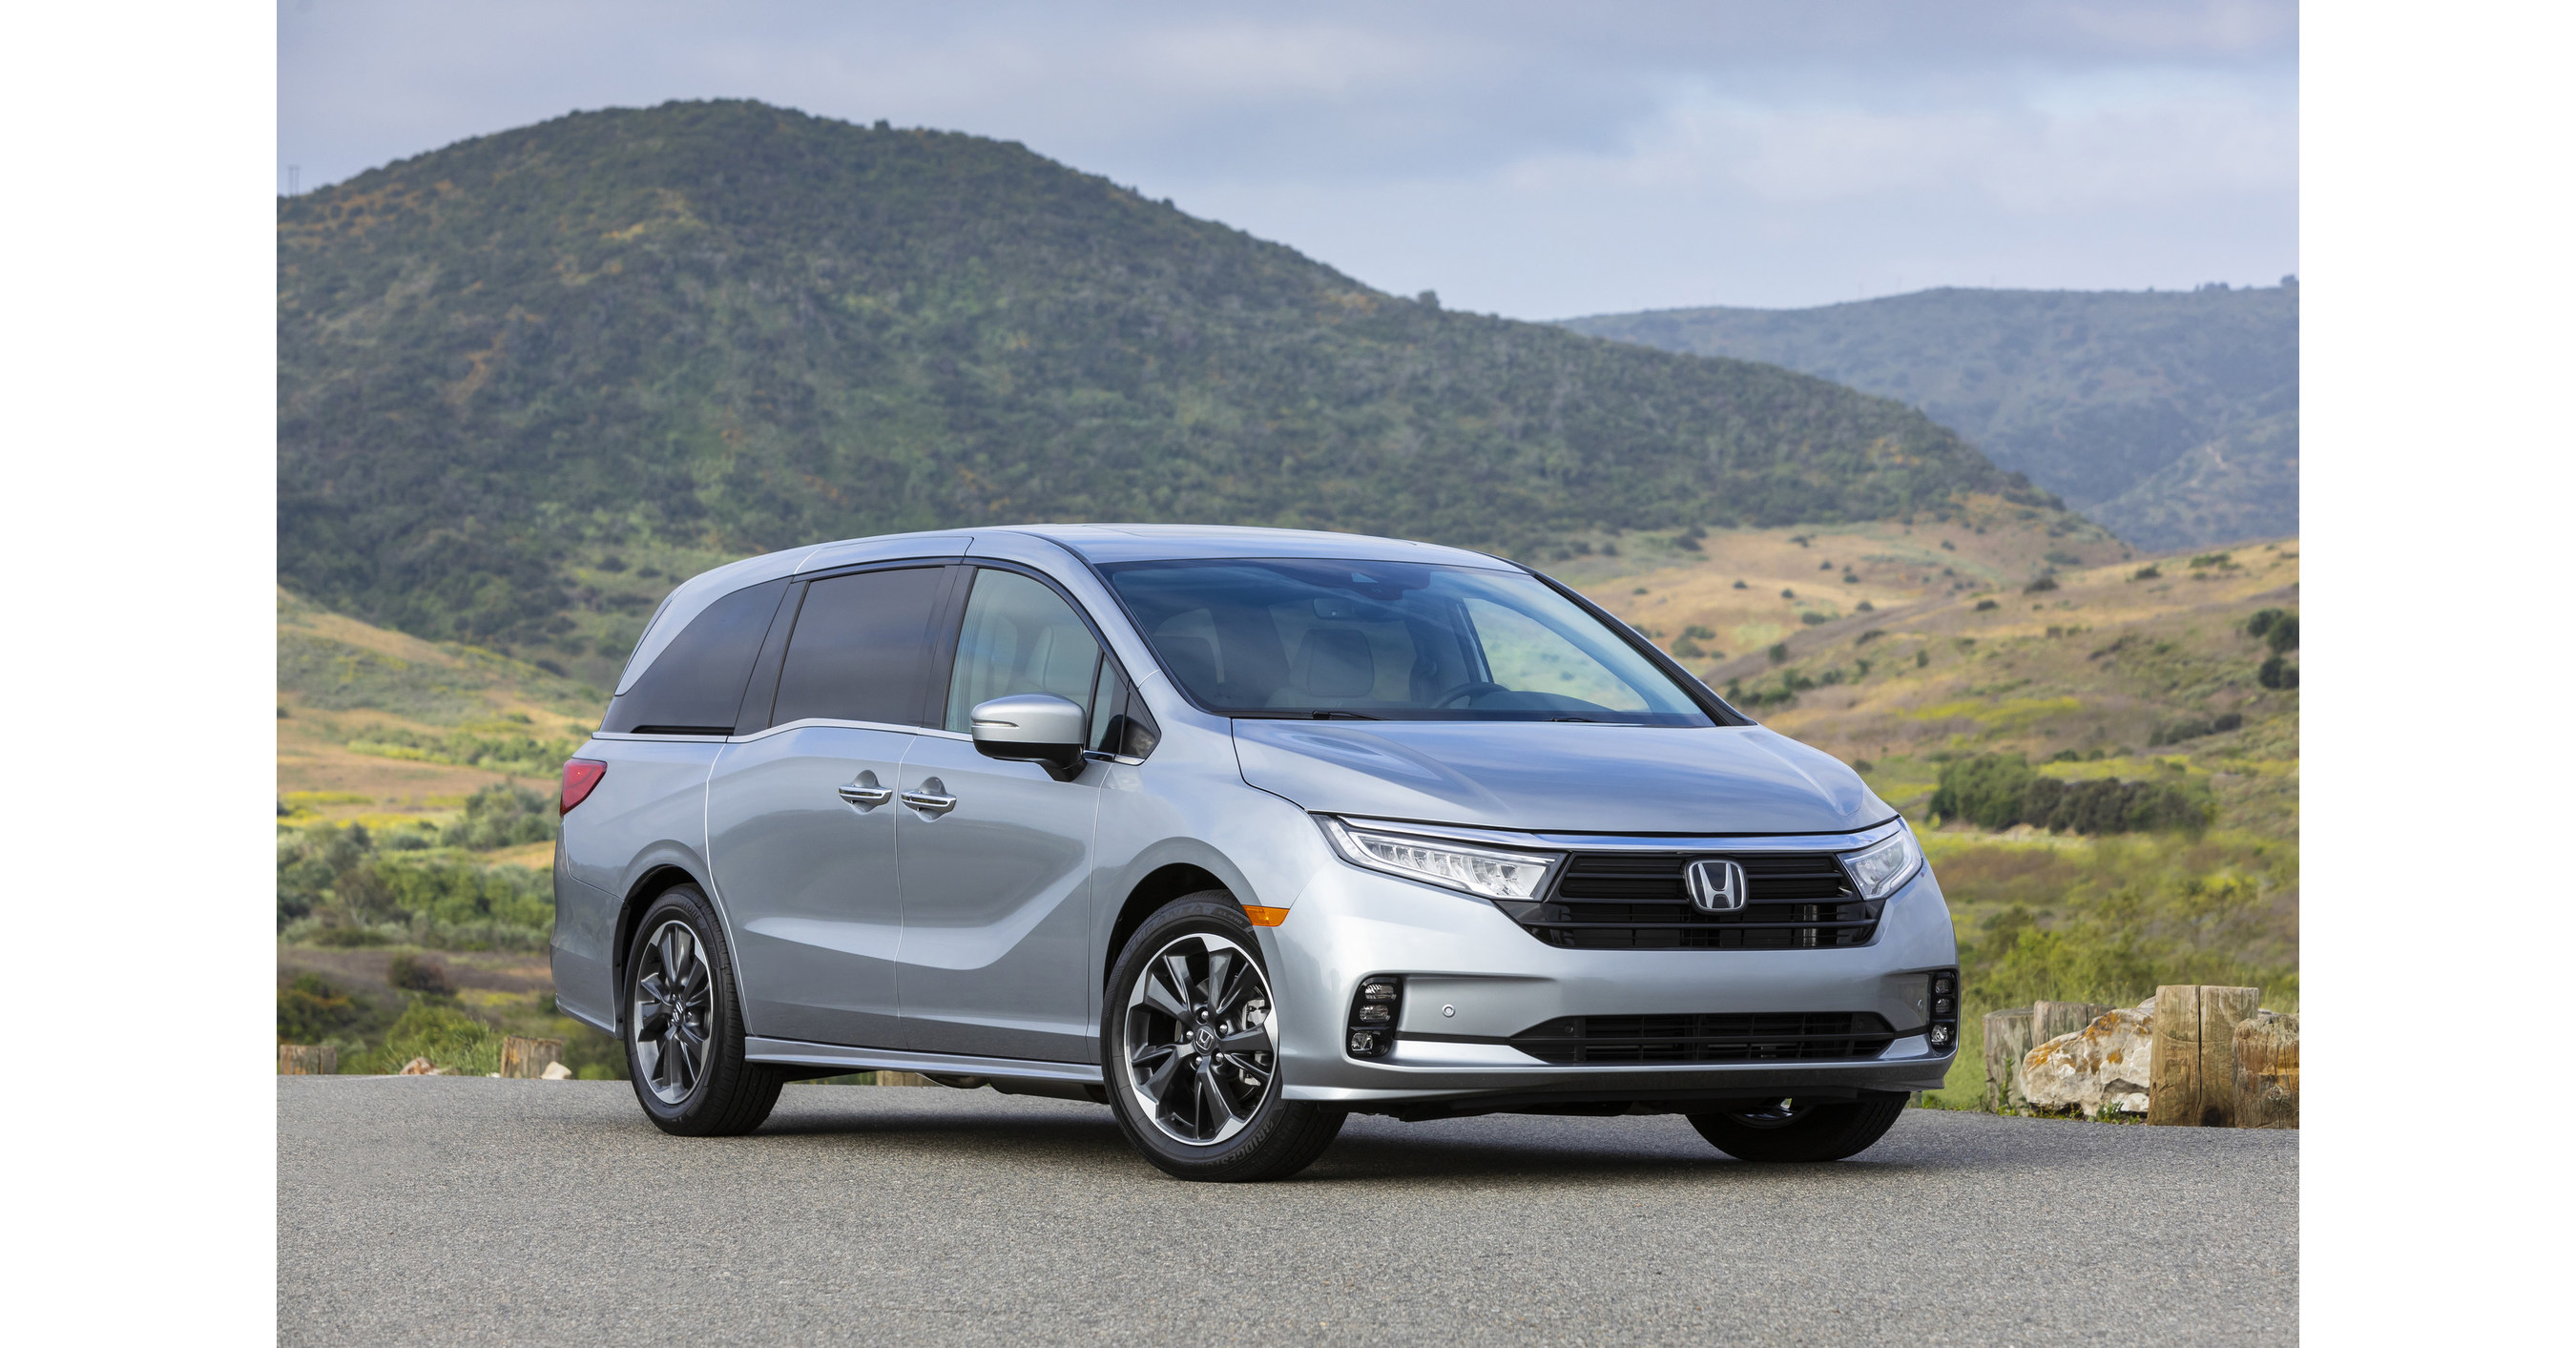 2021 Honda Odyssey: America's Most Popular Minivan Gets a Makeover  Including an Industry-First Rear Seat Reminder with Integrated Camera